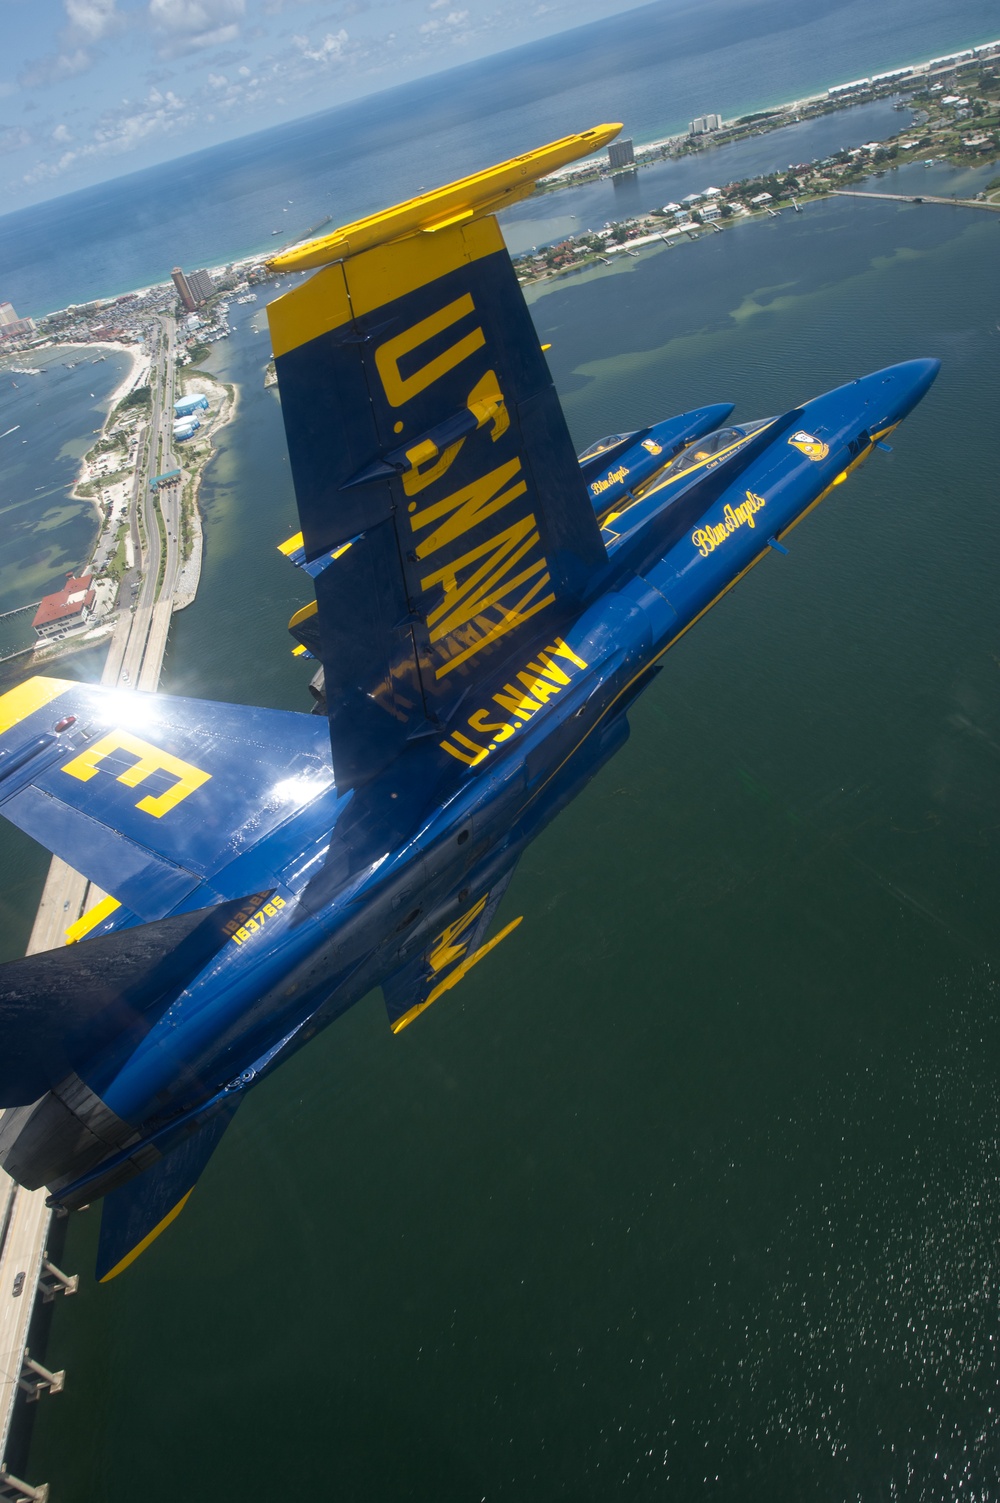 The Blue Angels practice in Florida